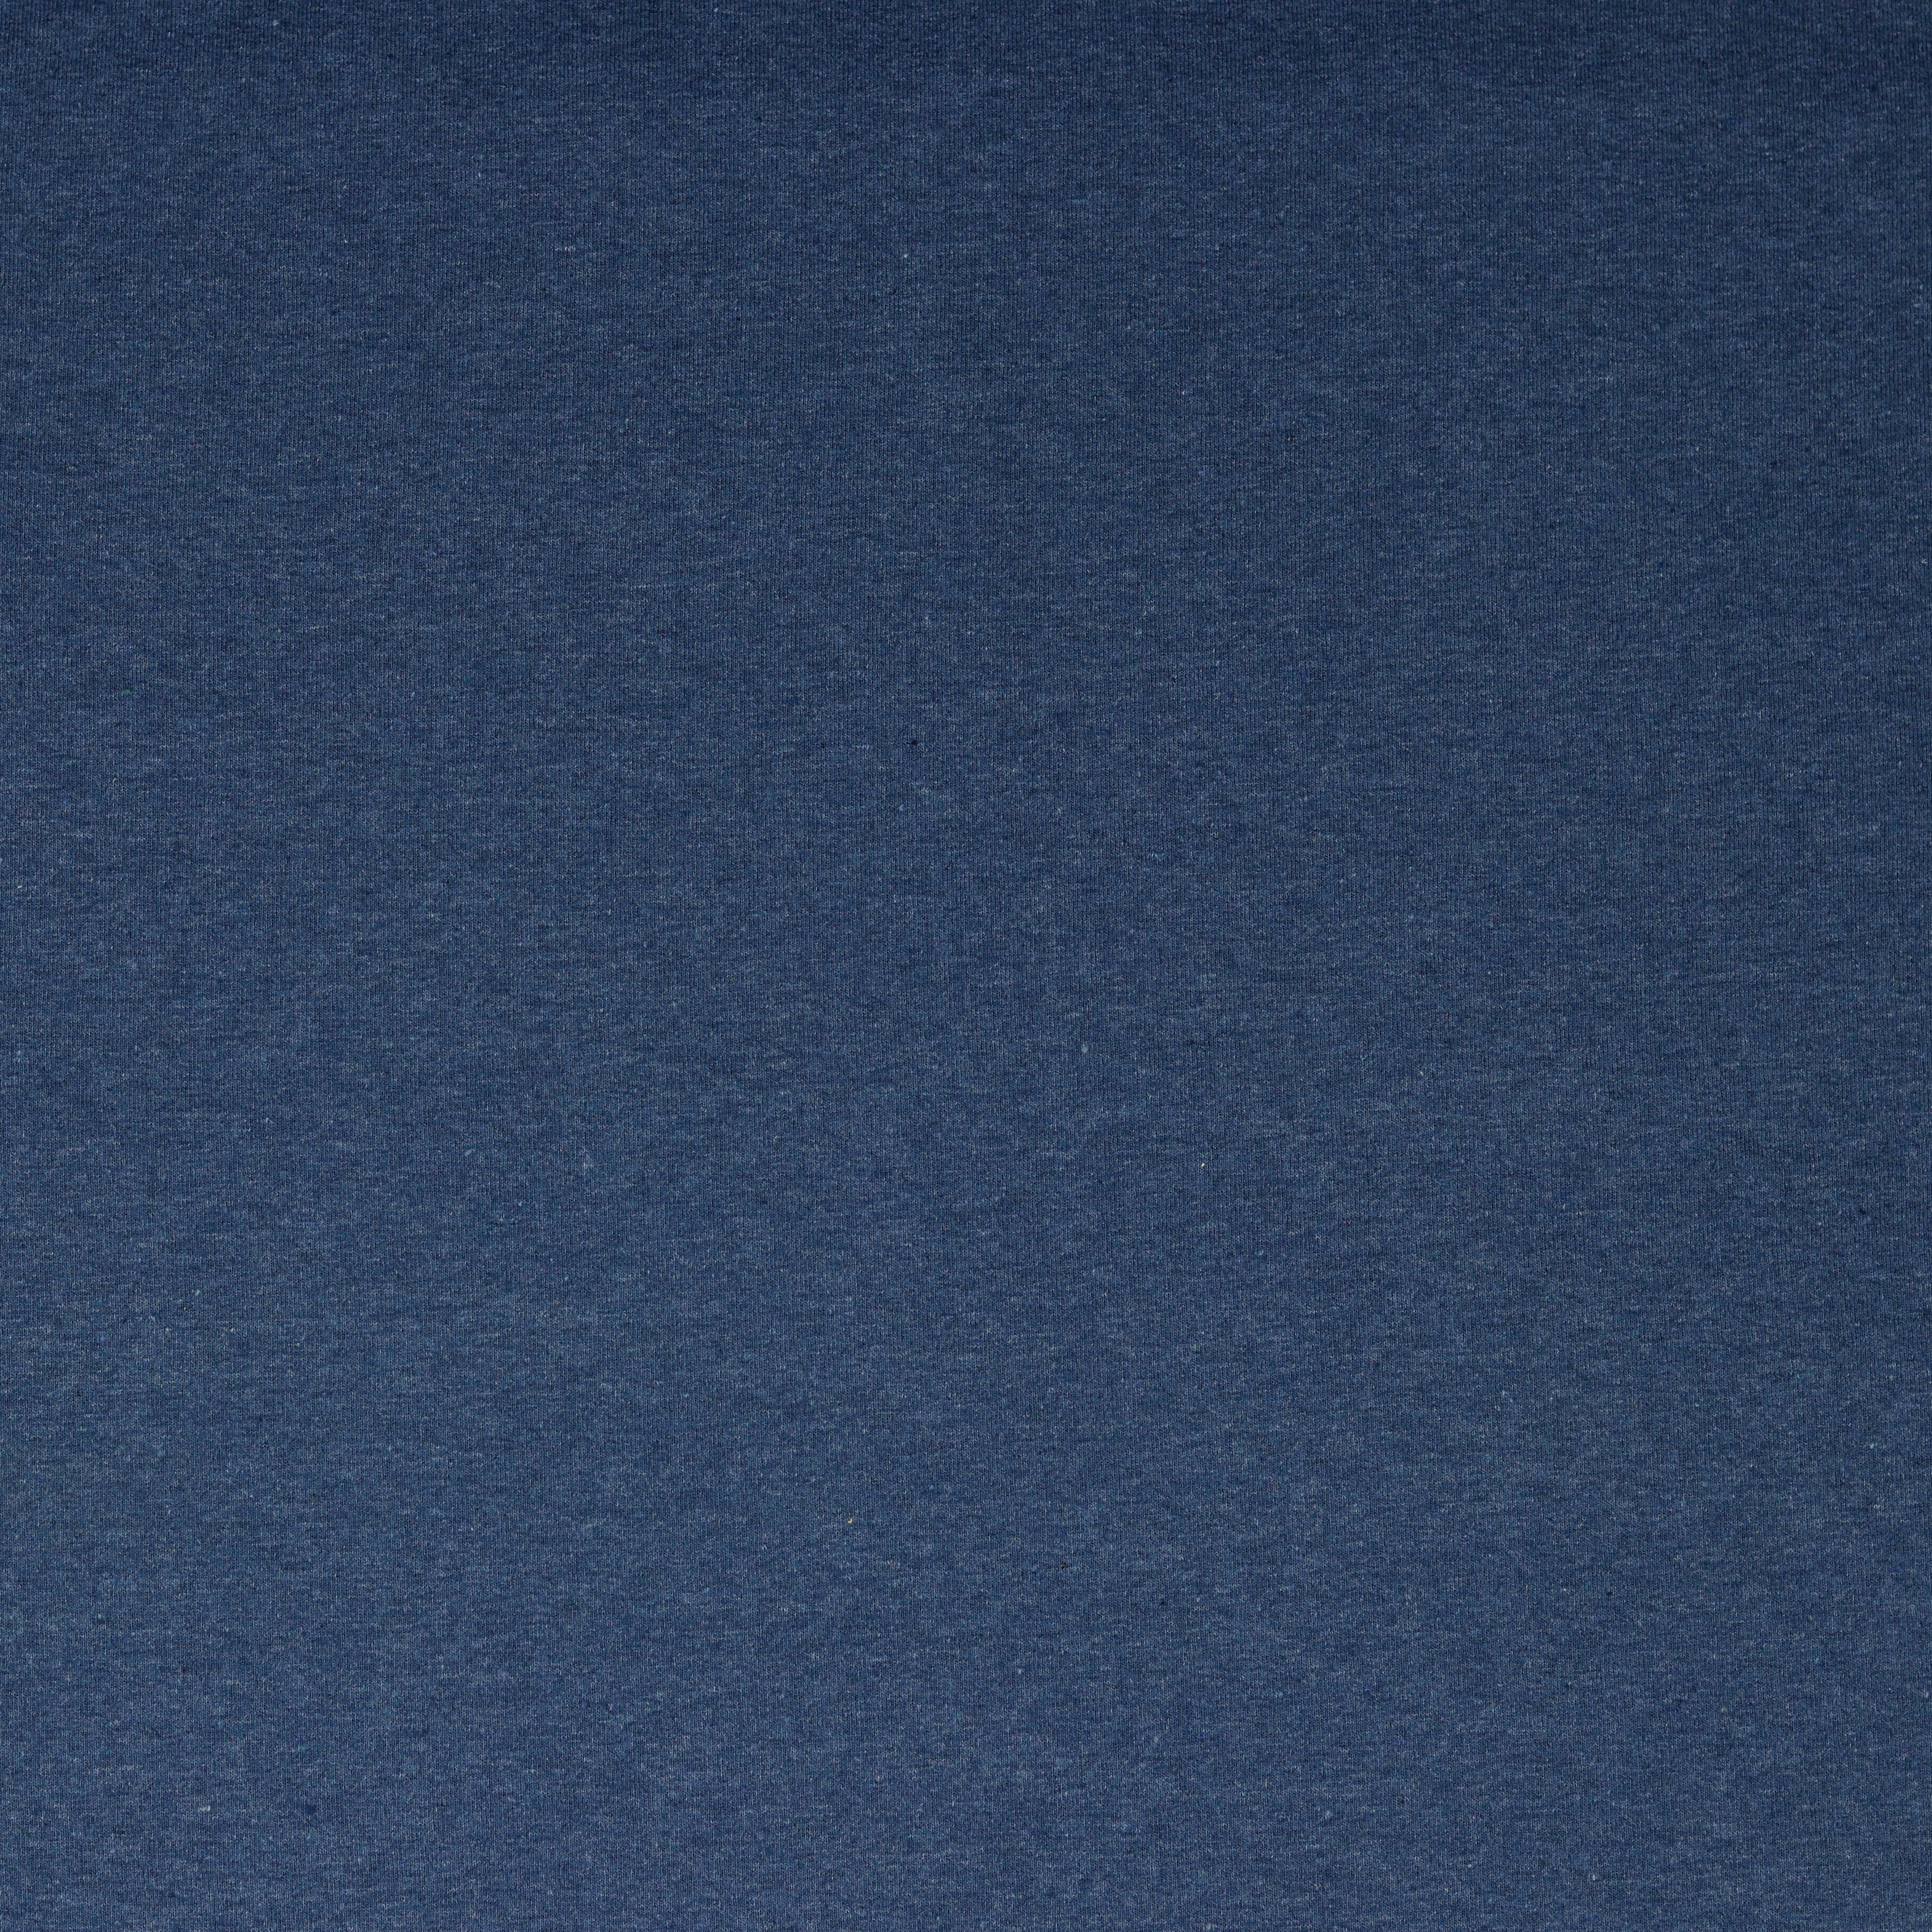 JERSEY RECYCLED BLUE SHADOW (high resolution)